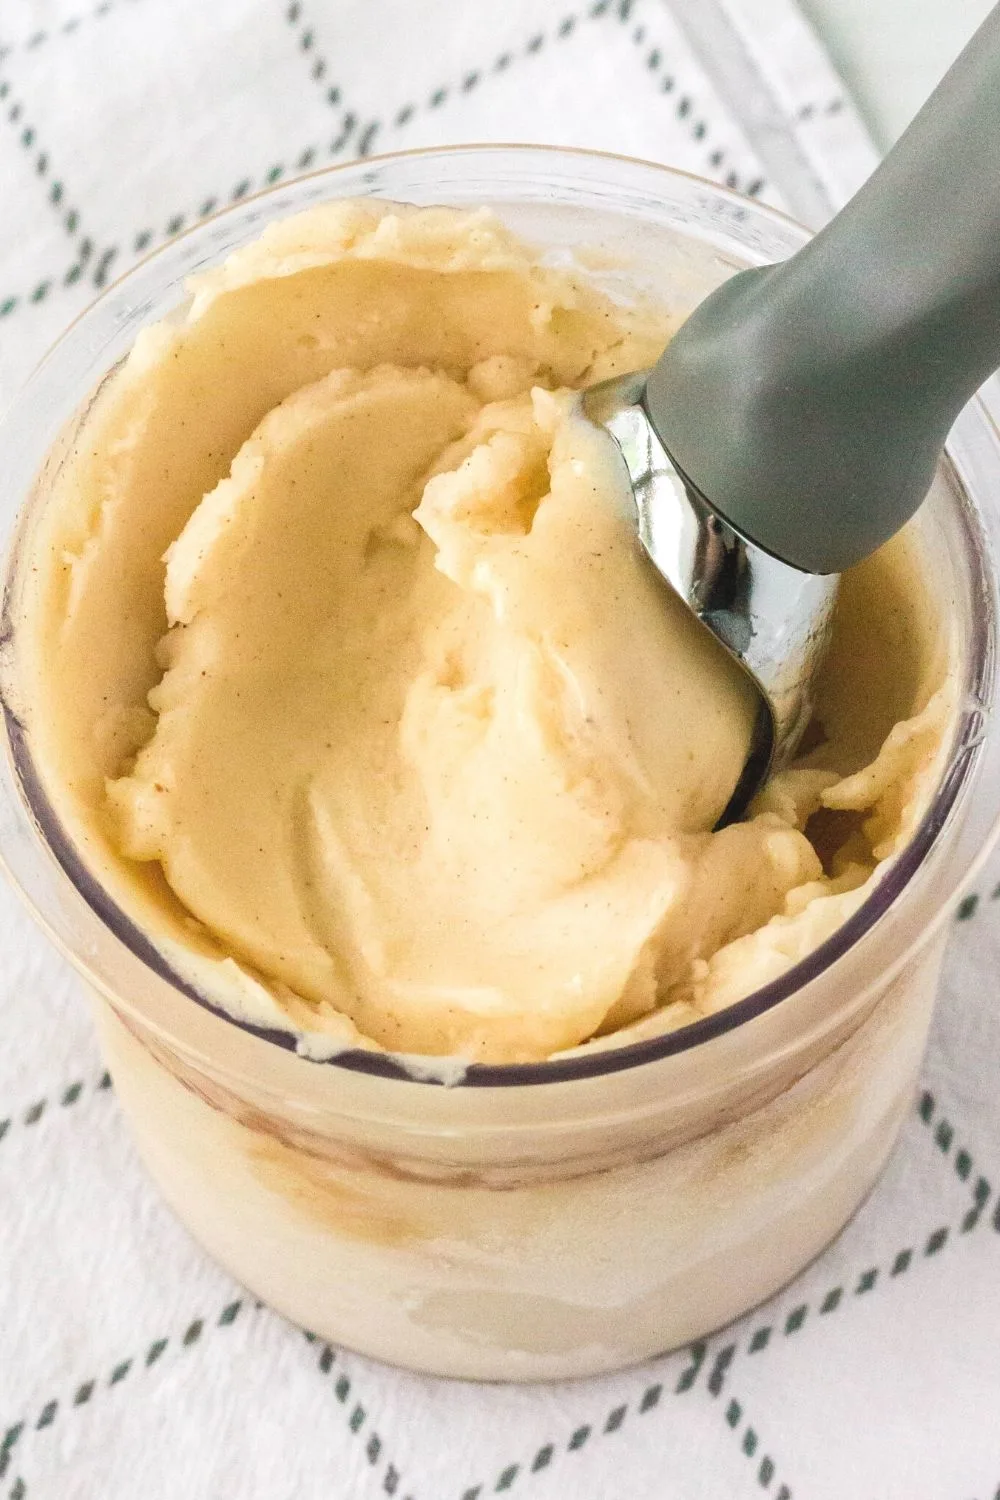 a Ninja Creami pint container filled with pear sorbet made from canned fruit. An ice cream scoop is in the container.